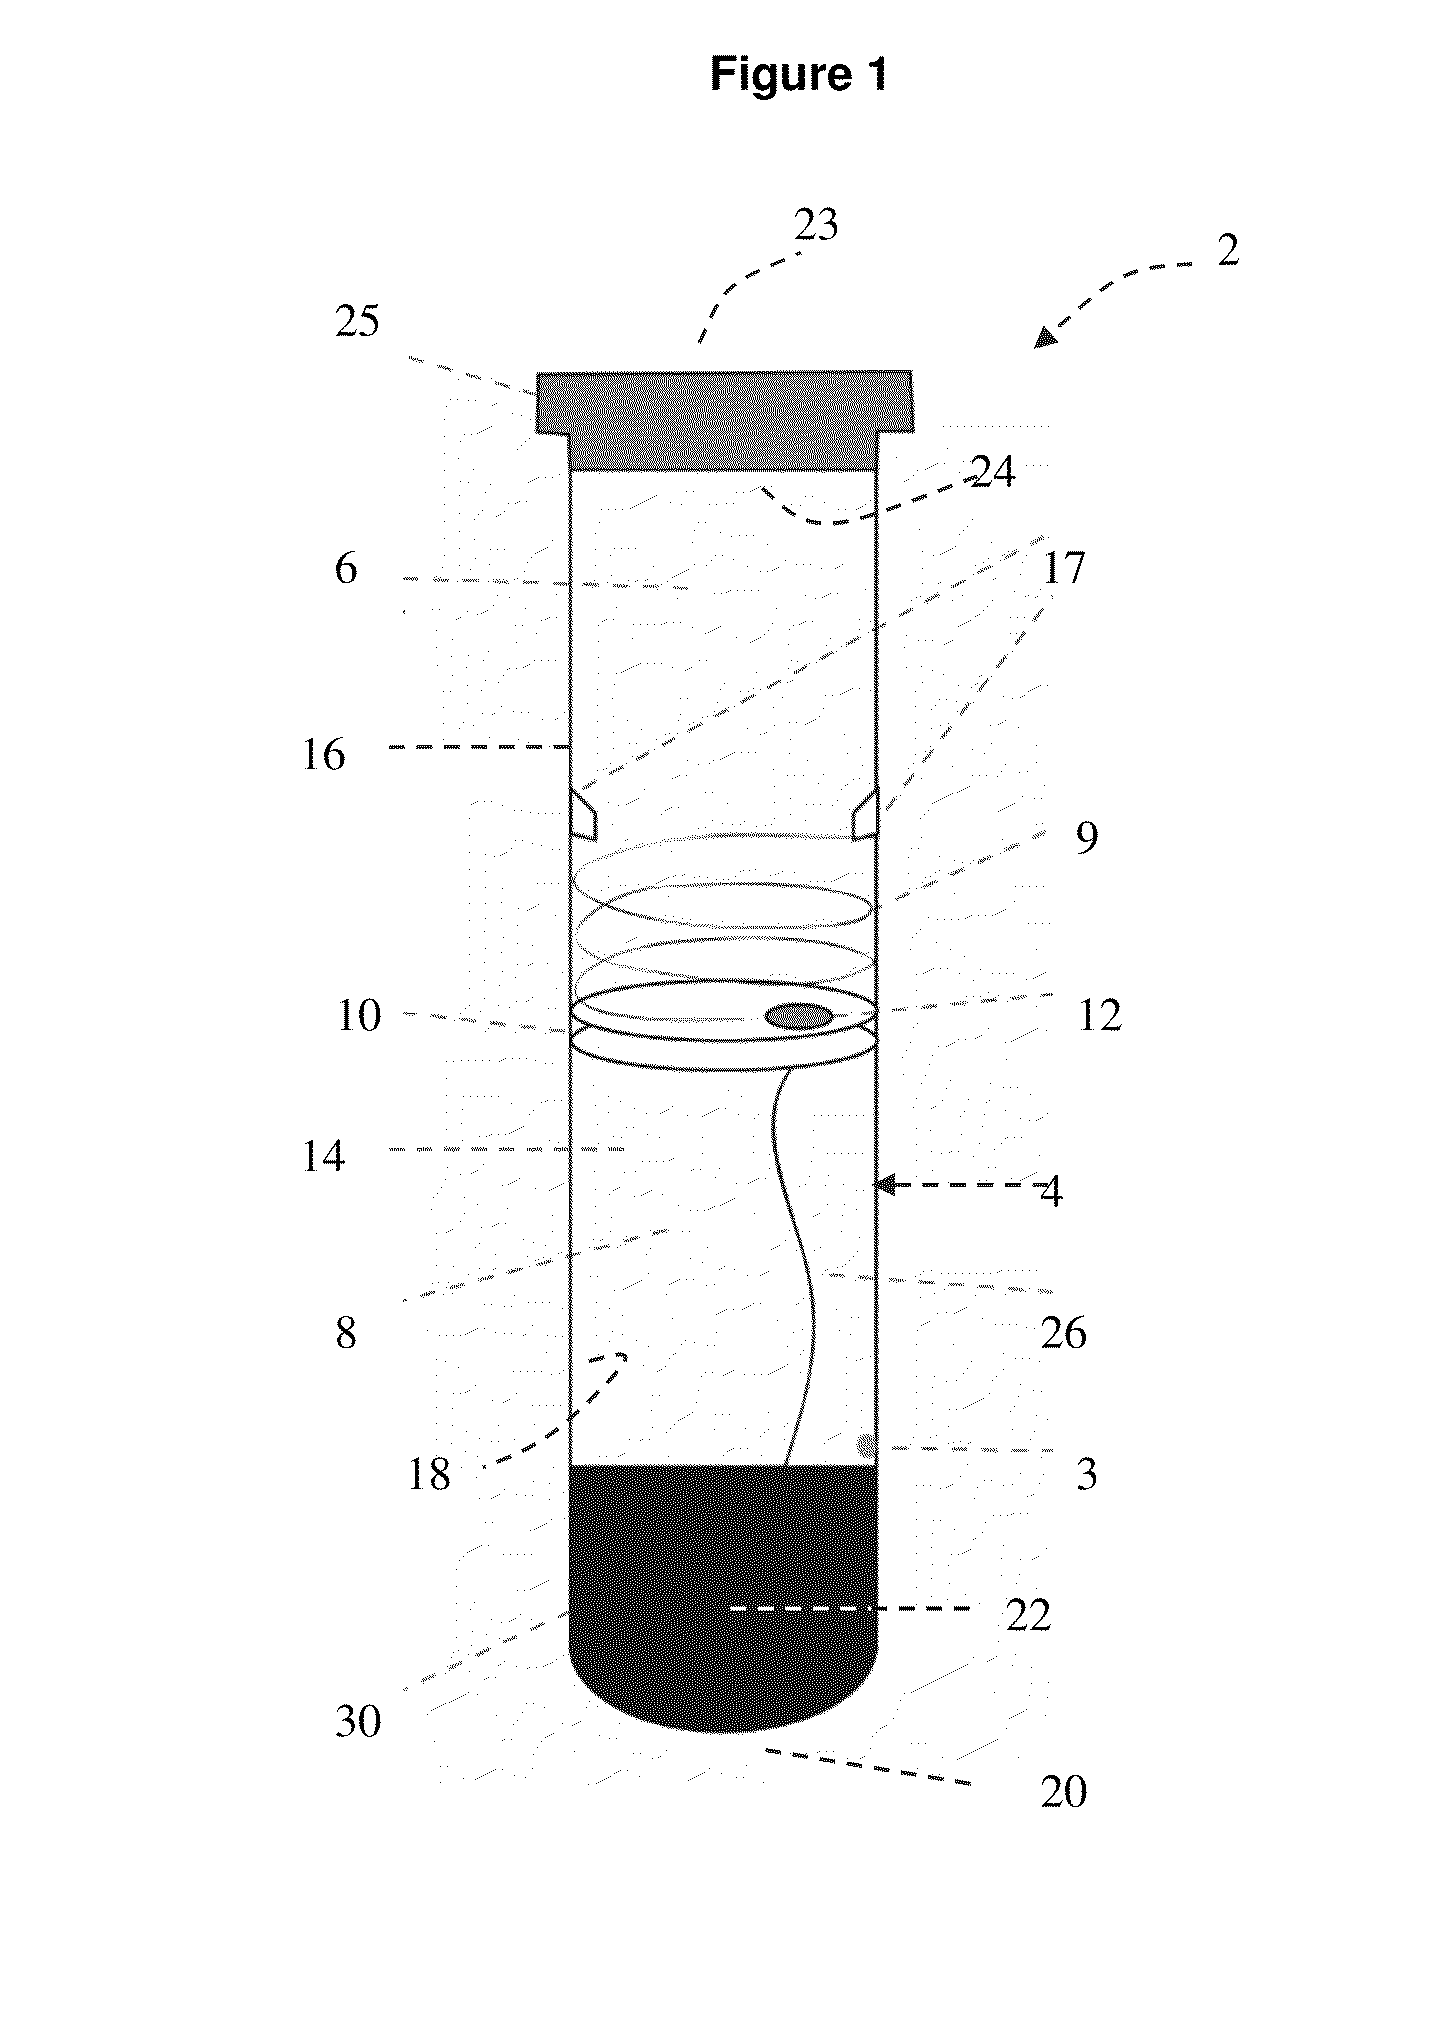 Collection device and method for stimulating and stabilizing a biological sample